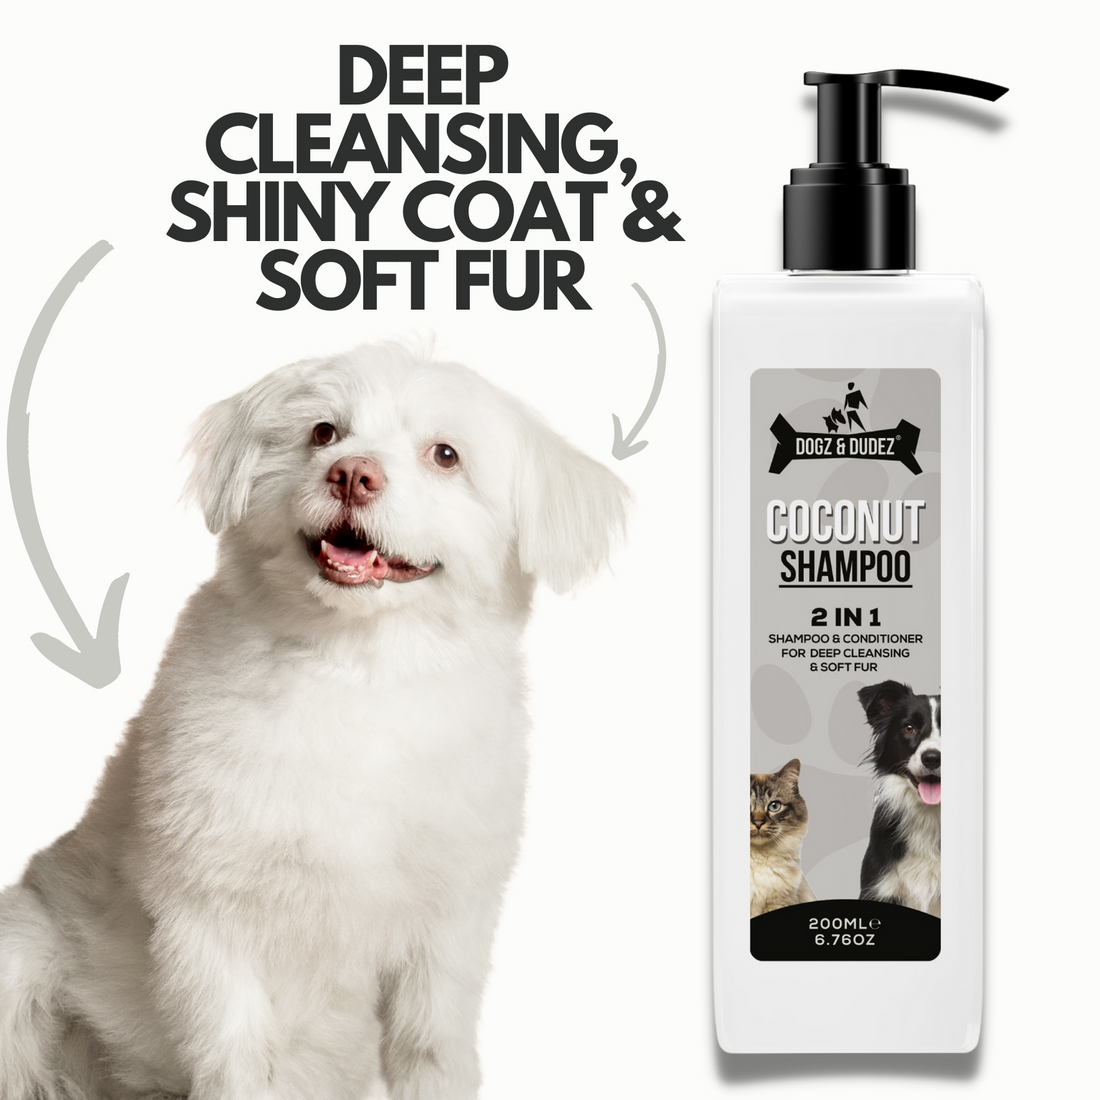 Dogz & Dudez Coconut Dog Shampoo for Puppy, Kitten, cat, and Adult Dogs. 2 in 1 Shampoo and Conditioner for Deep Cleansing and Soft Fur 200ml